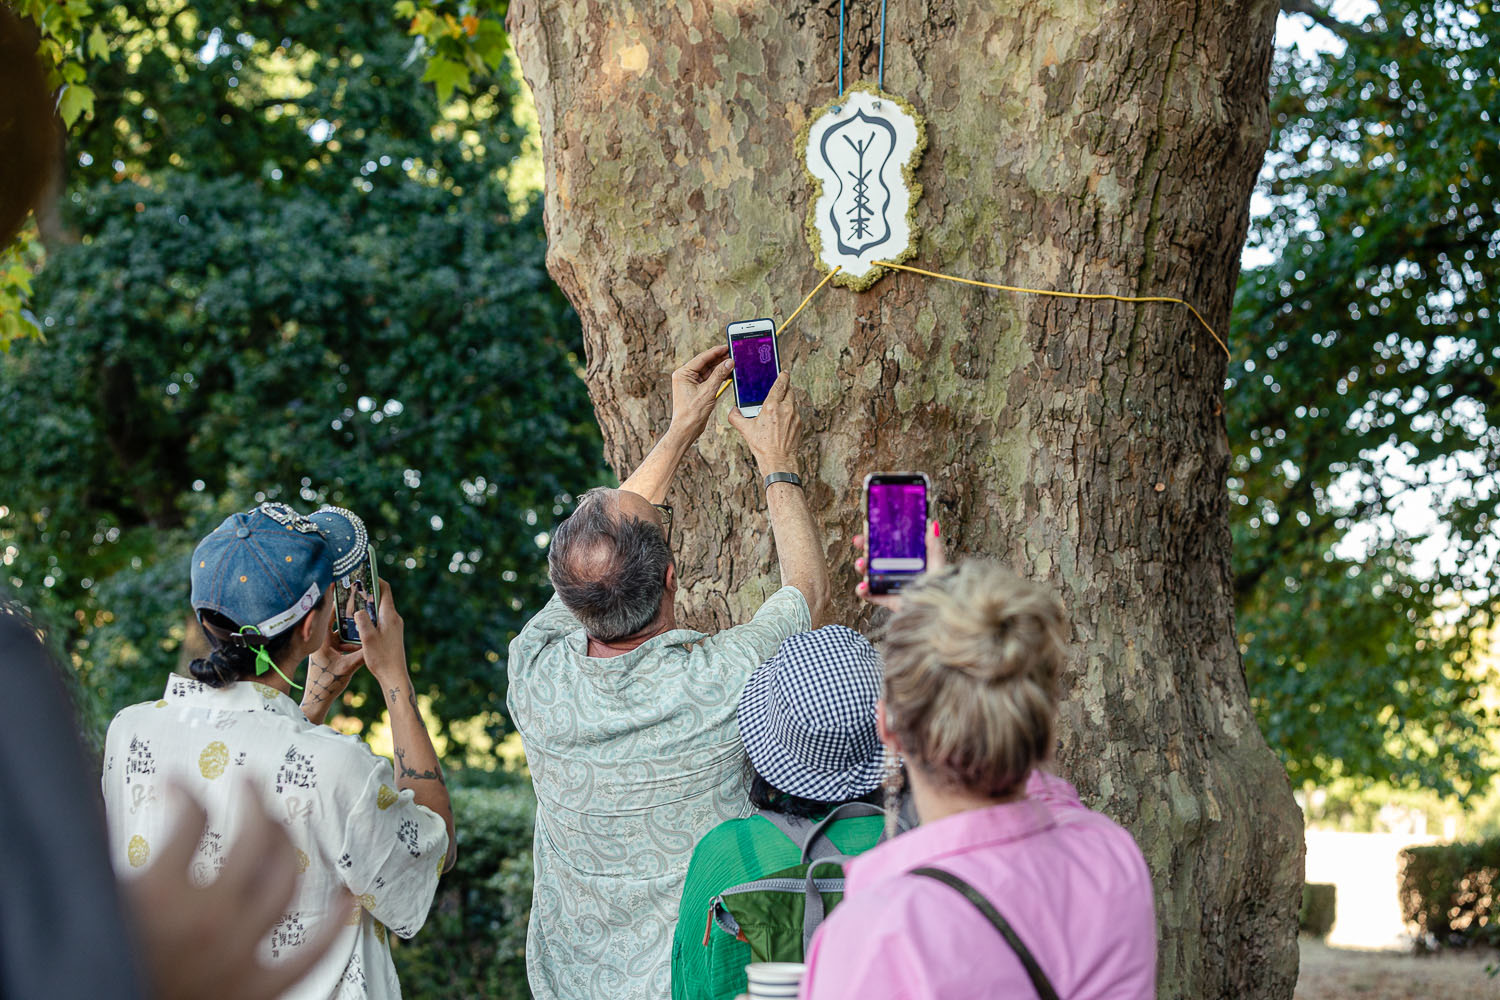 alt: Park users scanning a shape hanging from the tree in order to trigger the AR interaction with the sprites